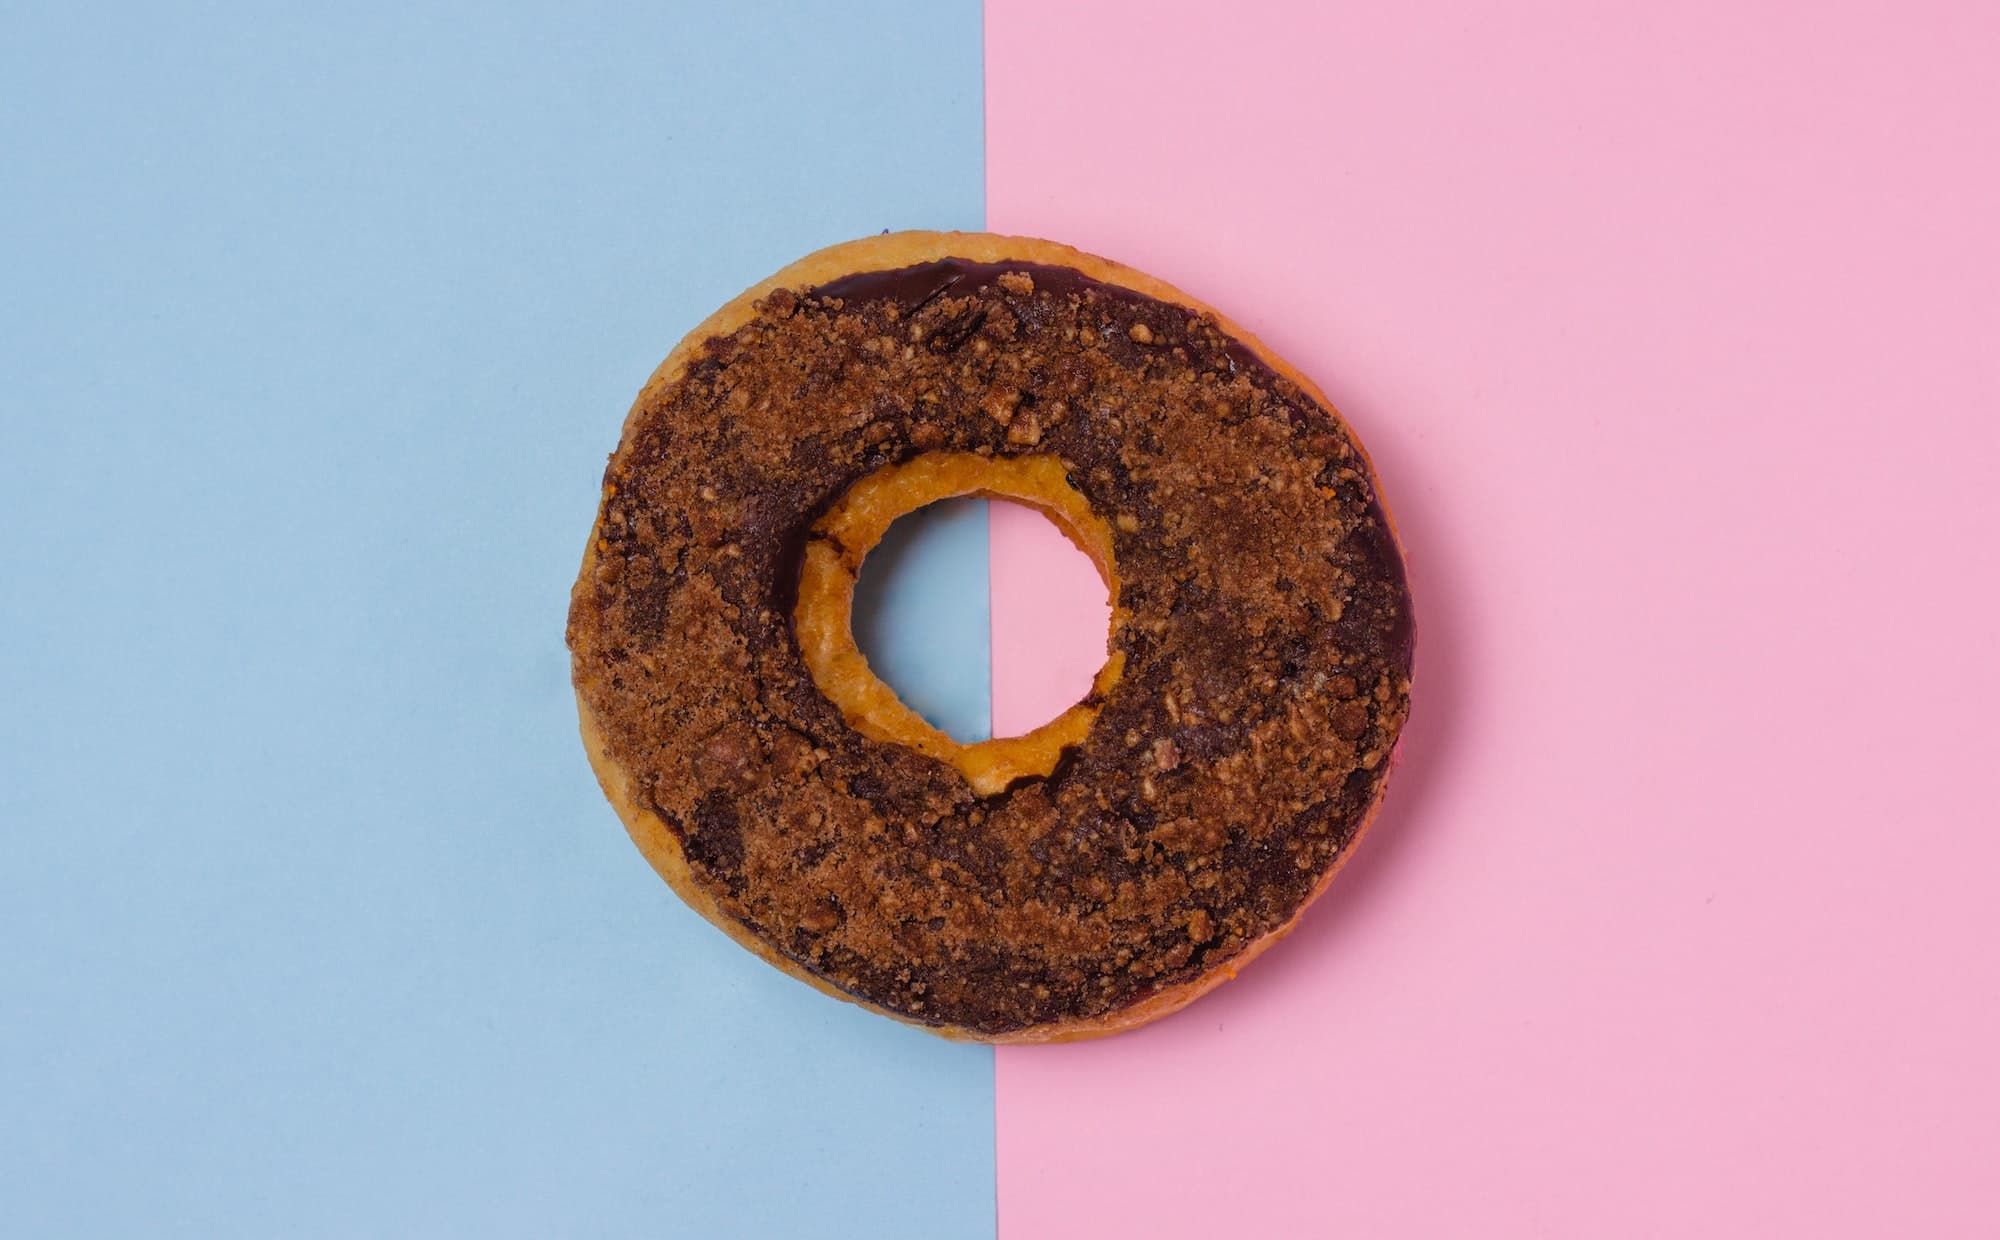 Donut on blue and pink background